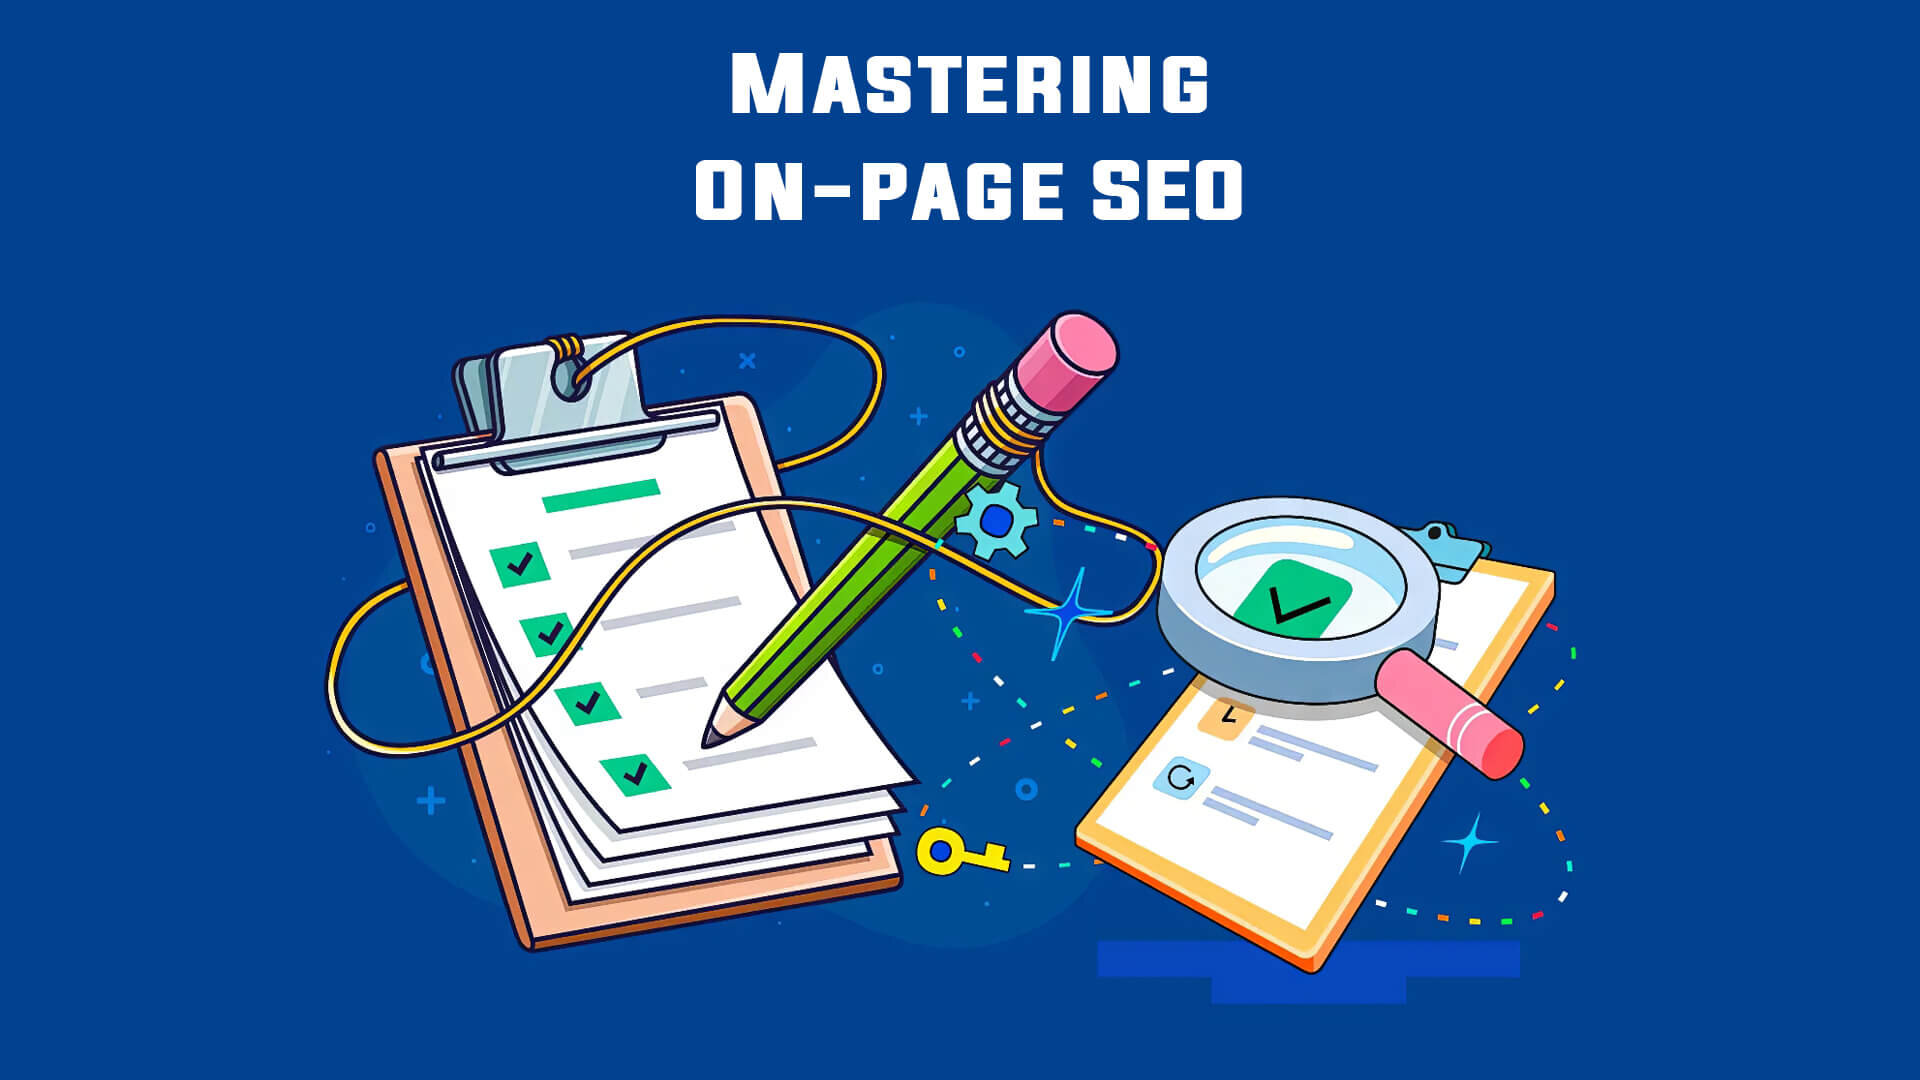 What Is Off-Page SEO? Strategies Beyond Links - Moz